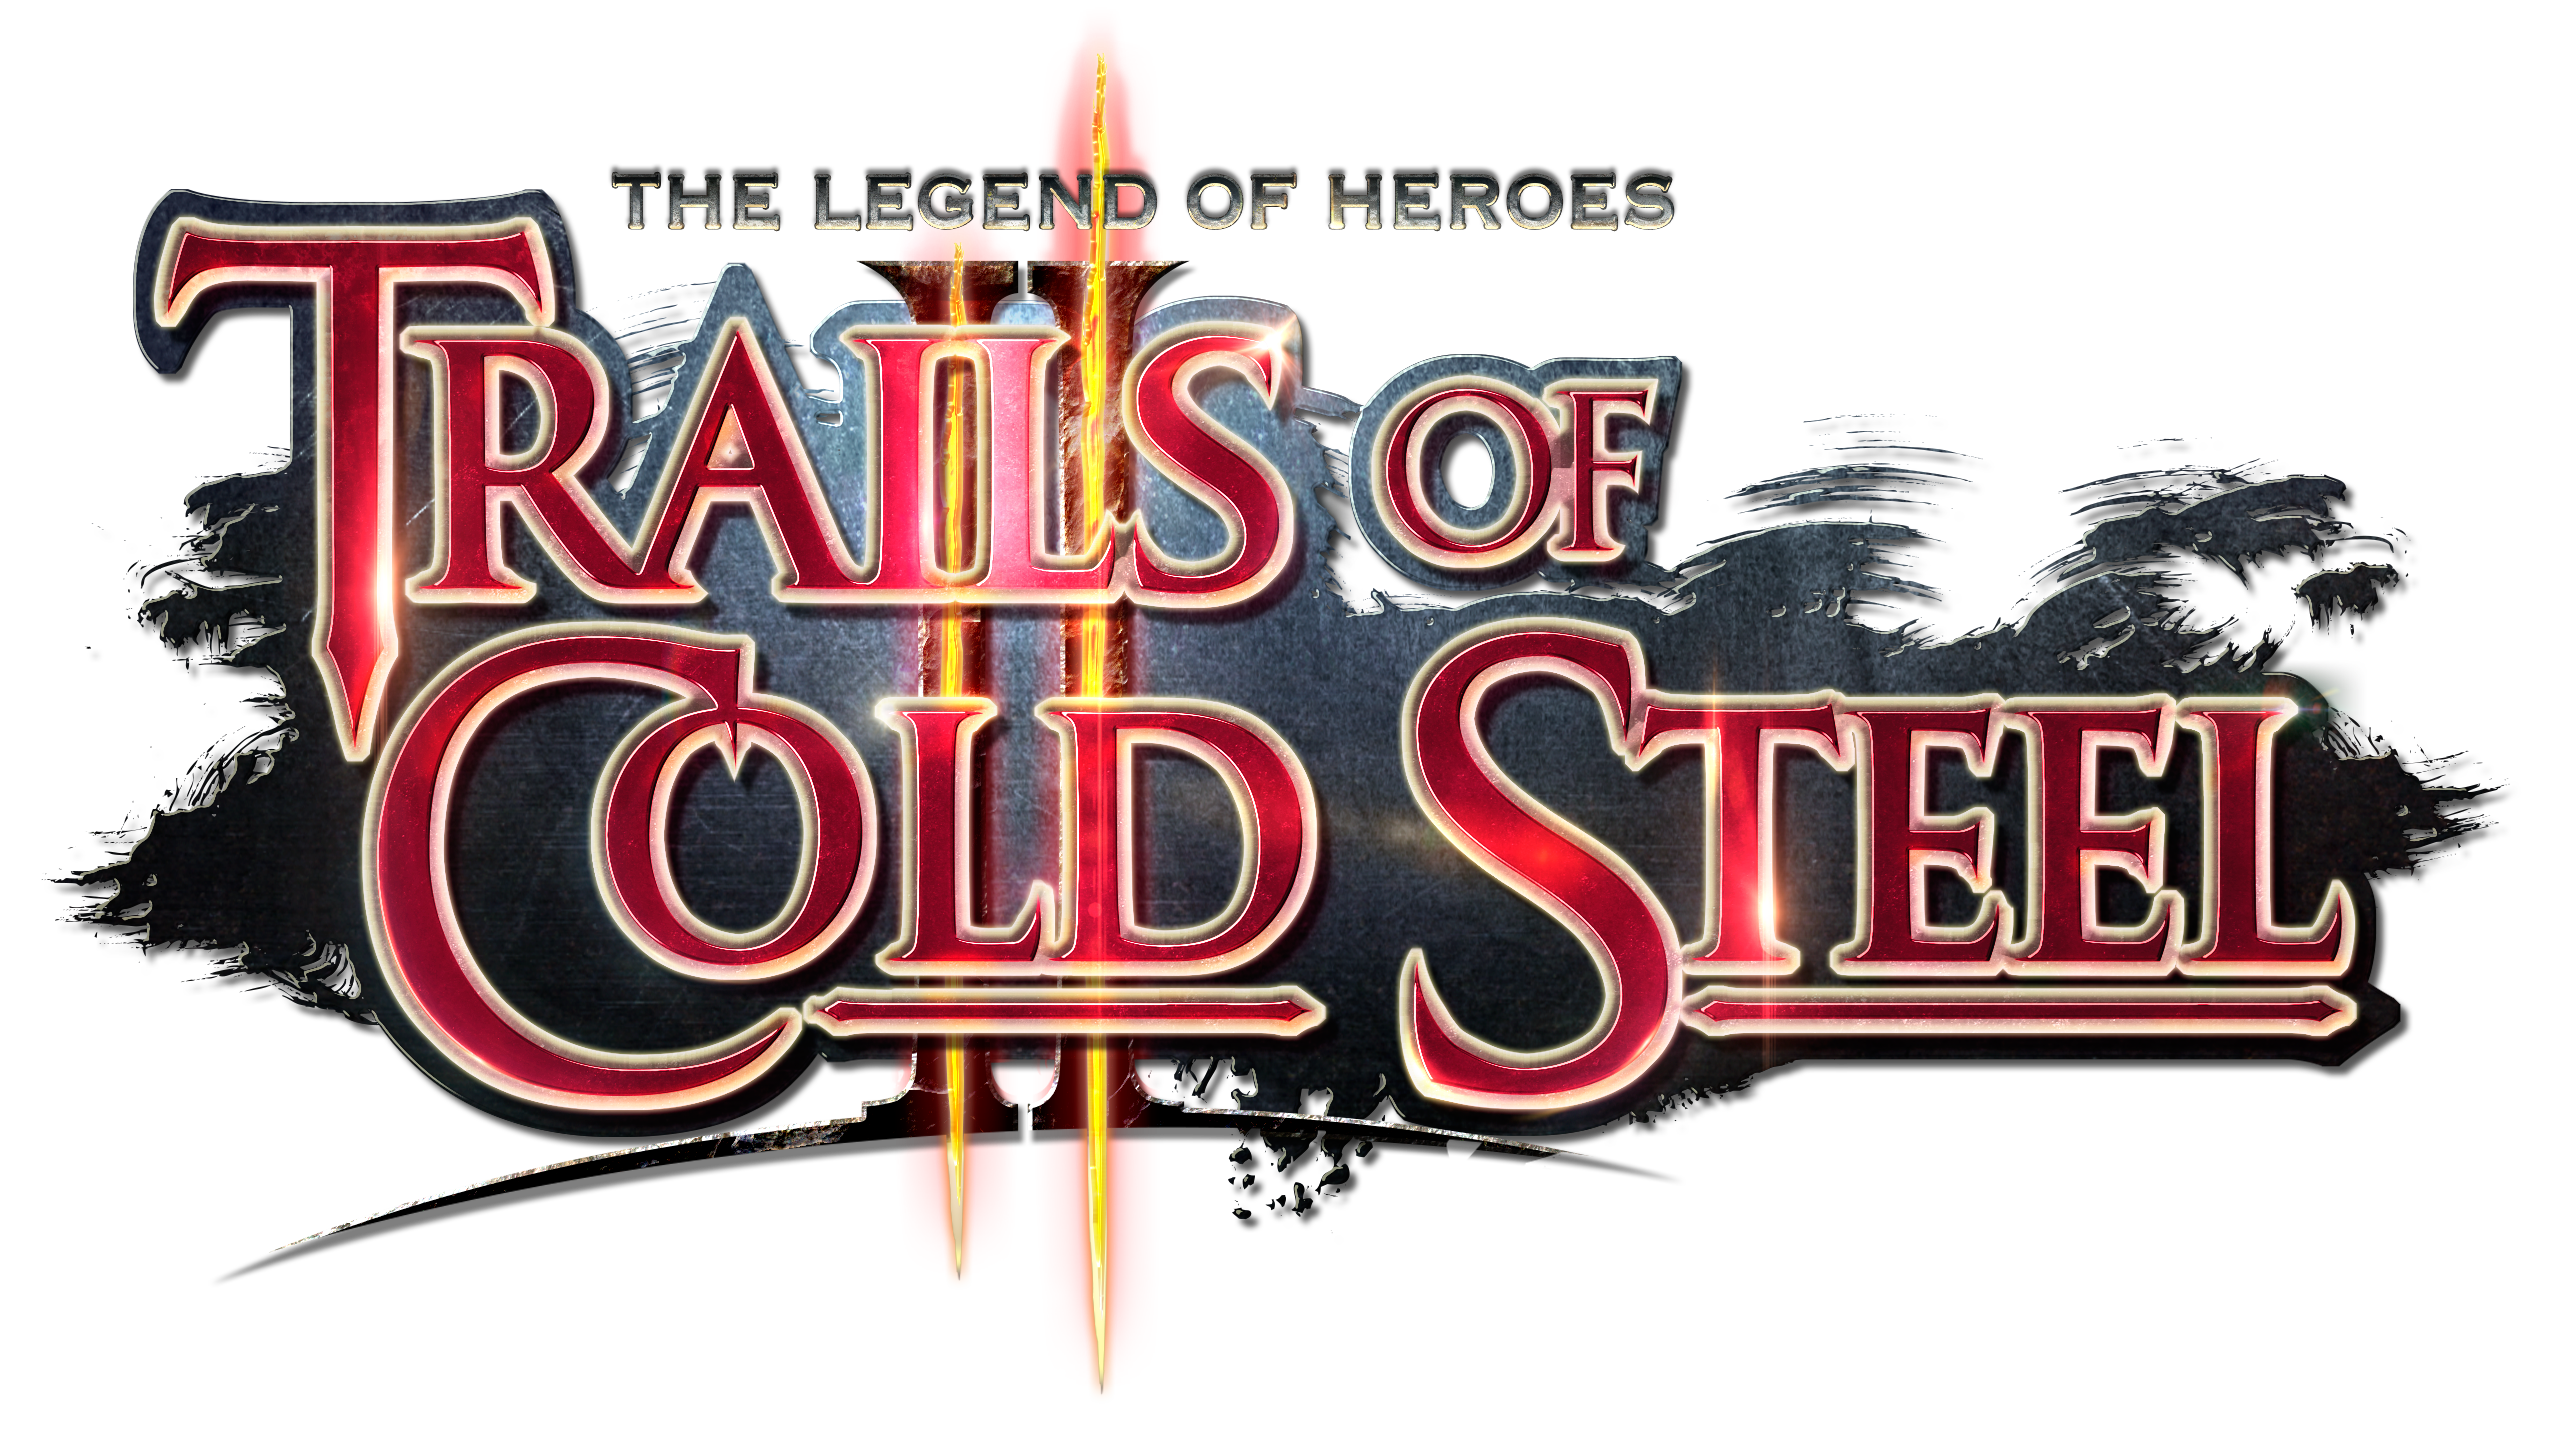 Trails the cold steel of legend heroes of Download The